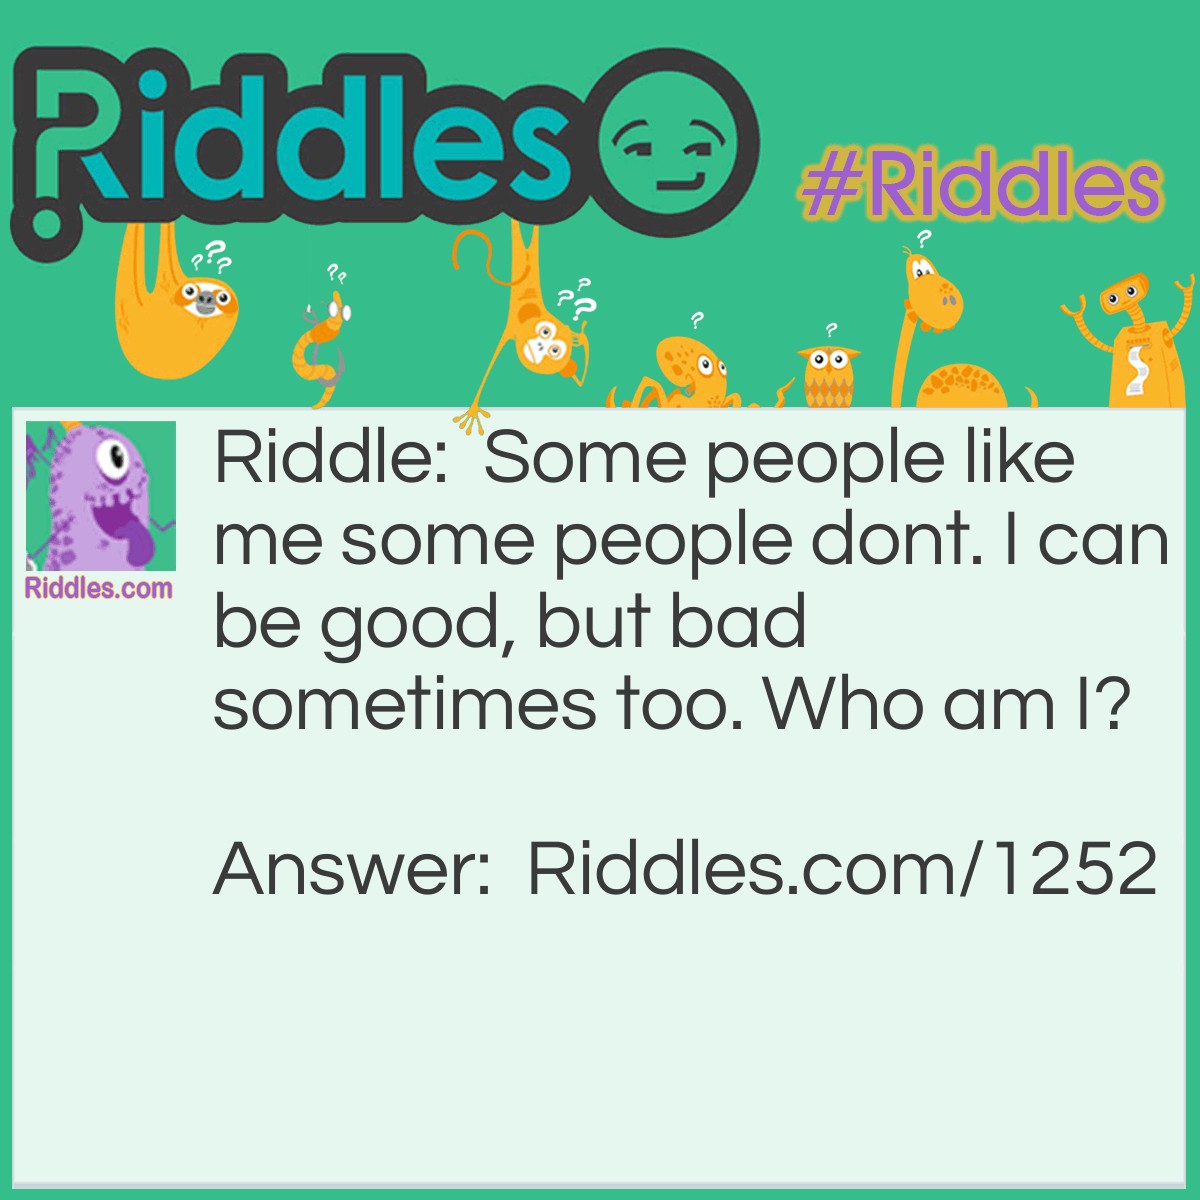 Riddle: Some people like me some people don't. I can be good, but bad sometimes too. Who am I? Answer: You.